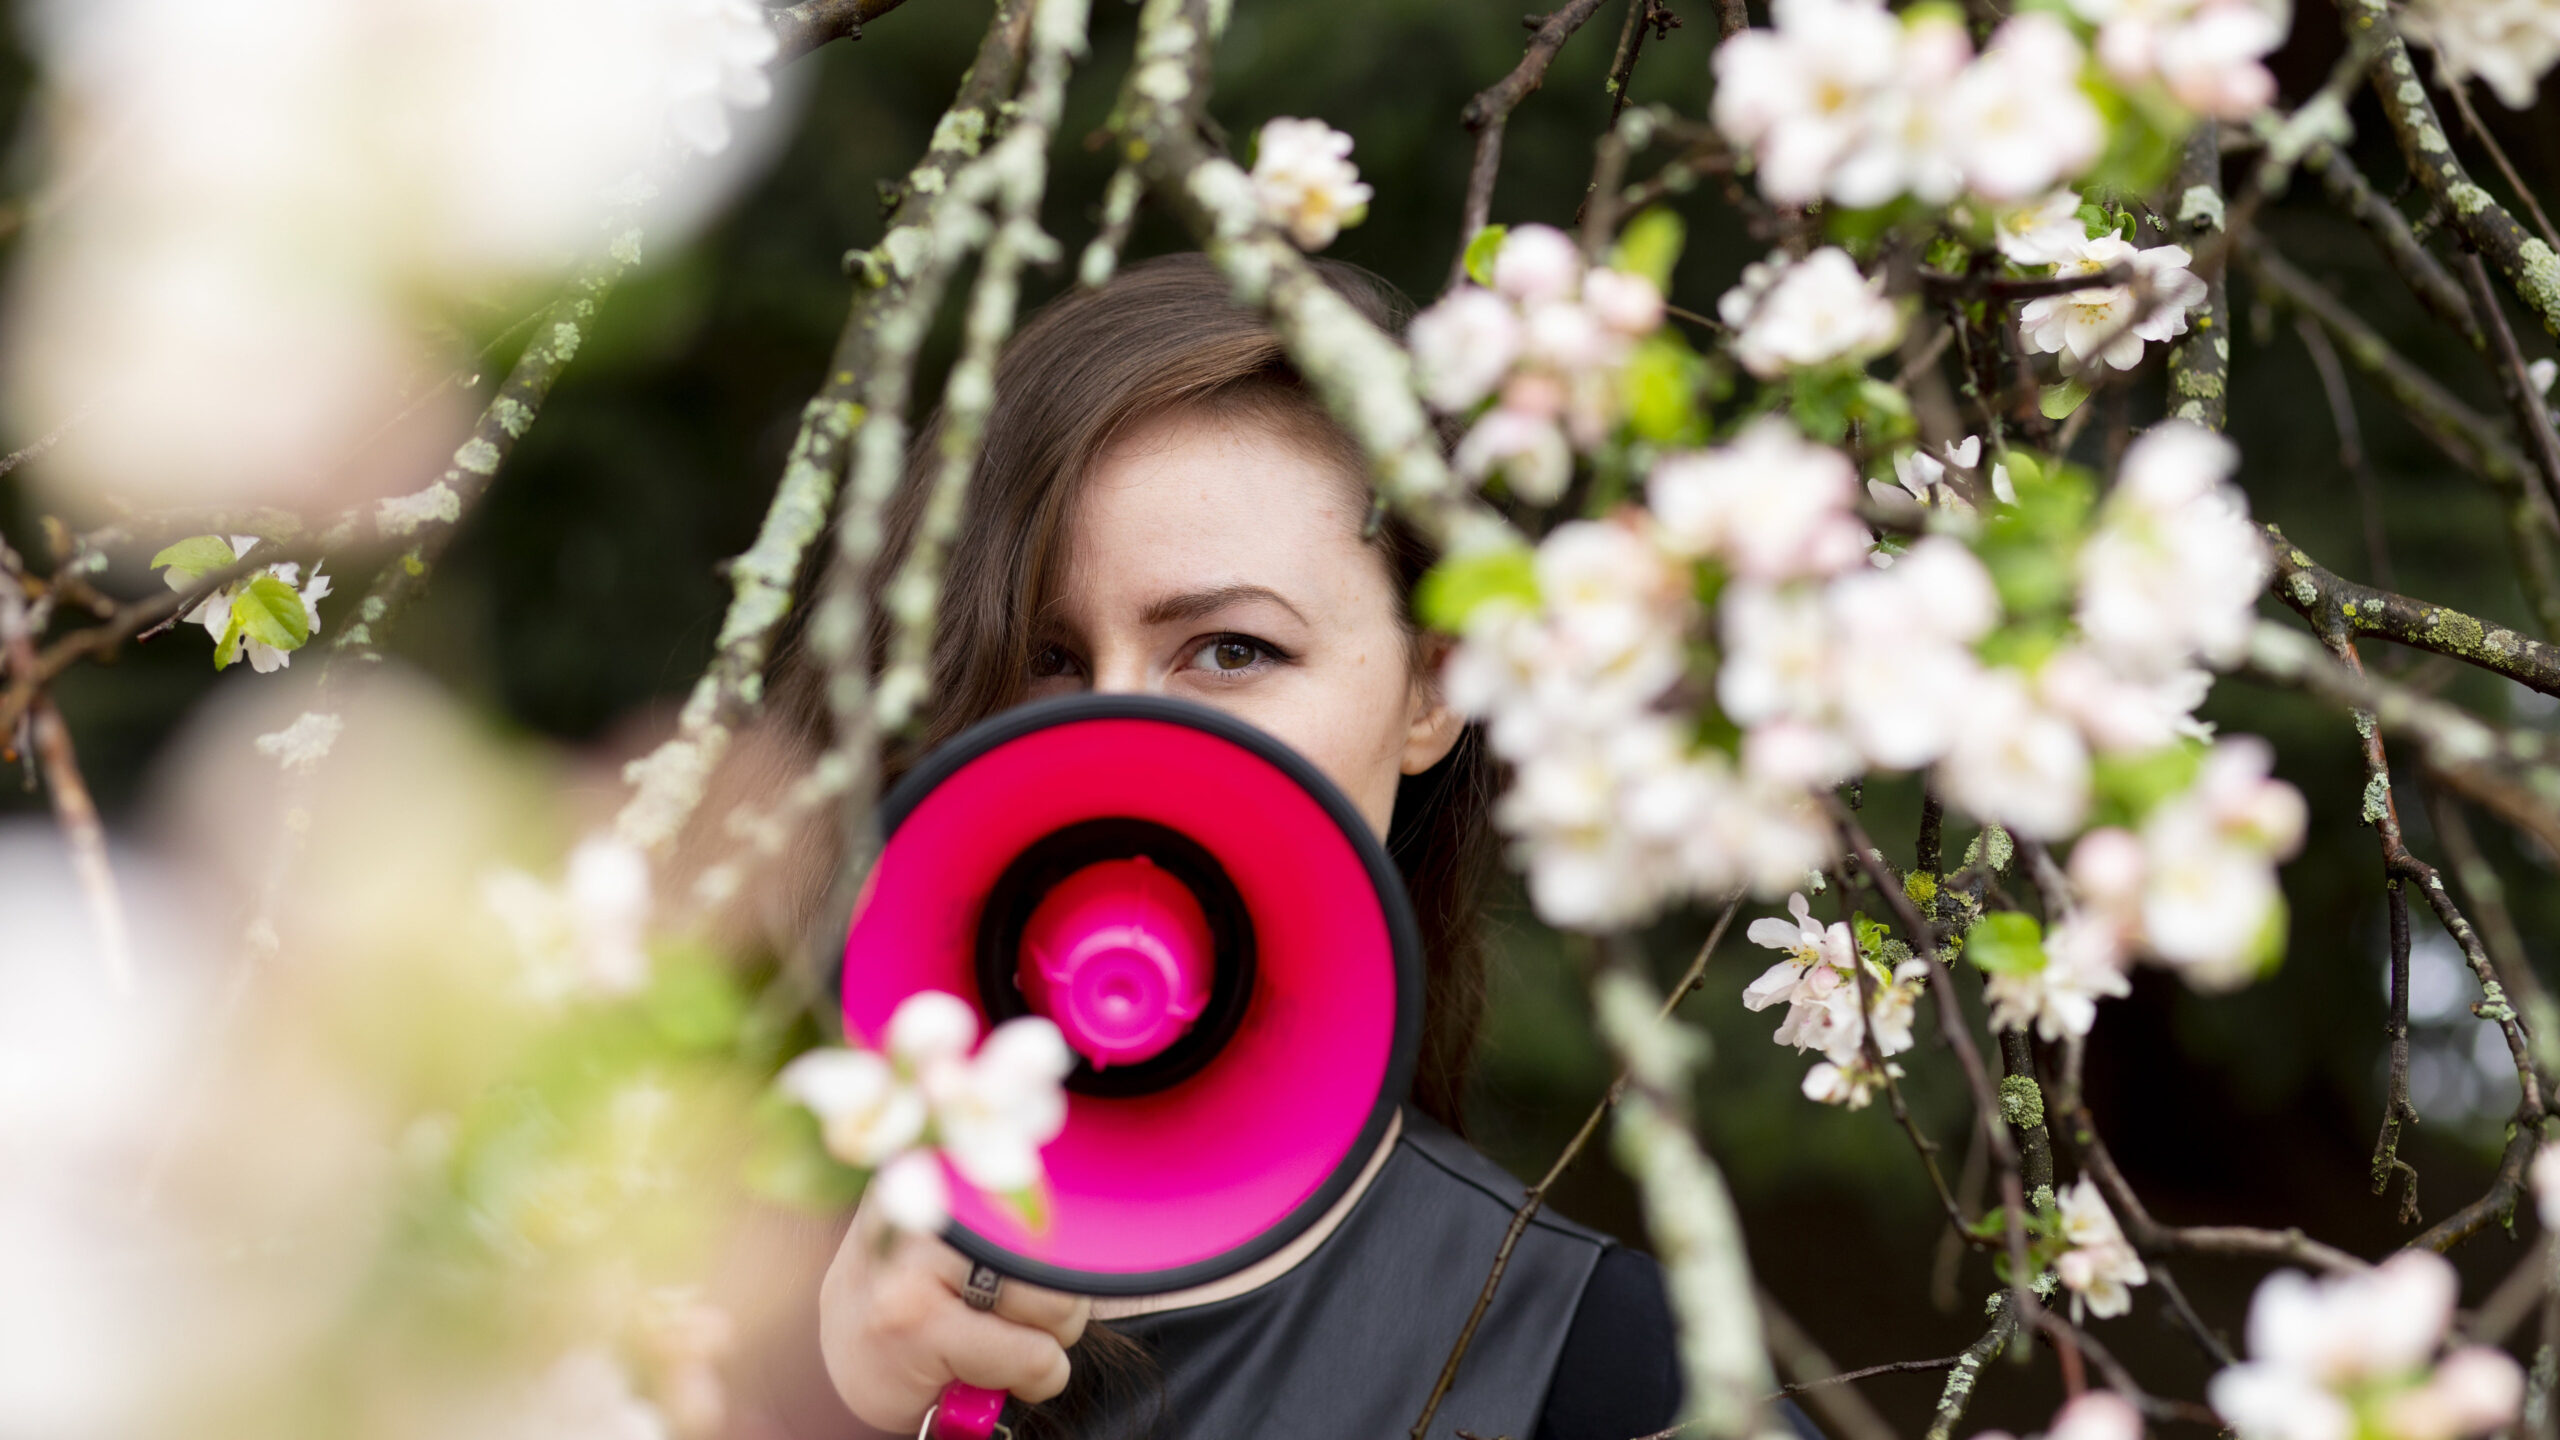 cover image showing Tina behind a pink megaphone looking directly at the camera, with her face partially obscured by the megaphone so that only her eye is visible. she is surrounded by branches of a flowering tree with a narrow plane of focus so that the branches in the foreground are blurry.